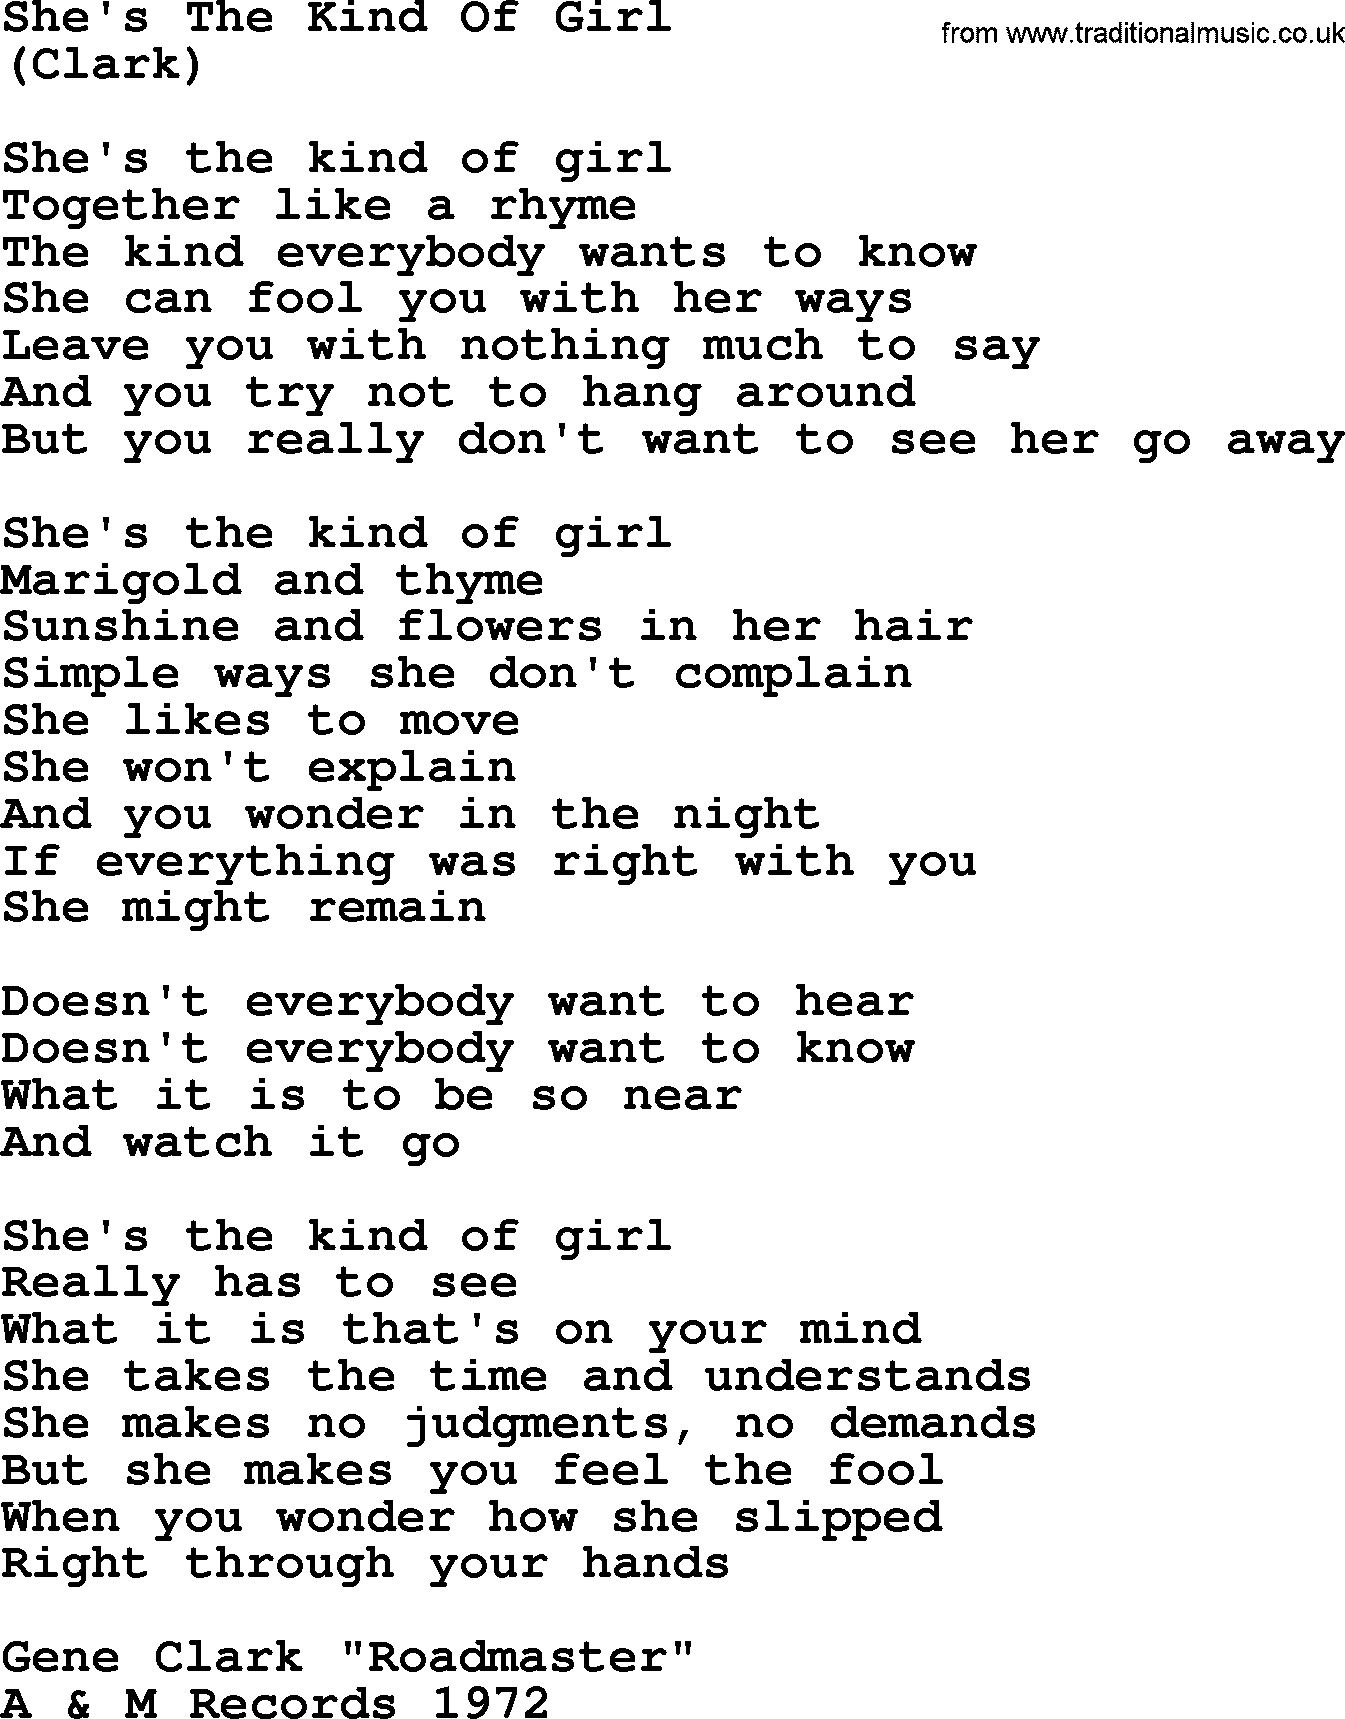 The Byrds song She's The Kind Of Girl, lyrics